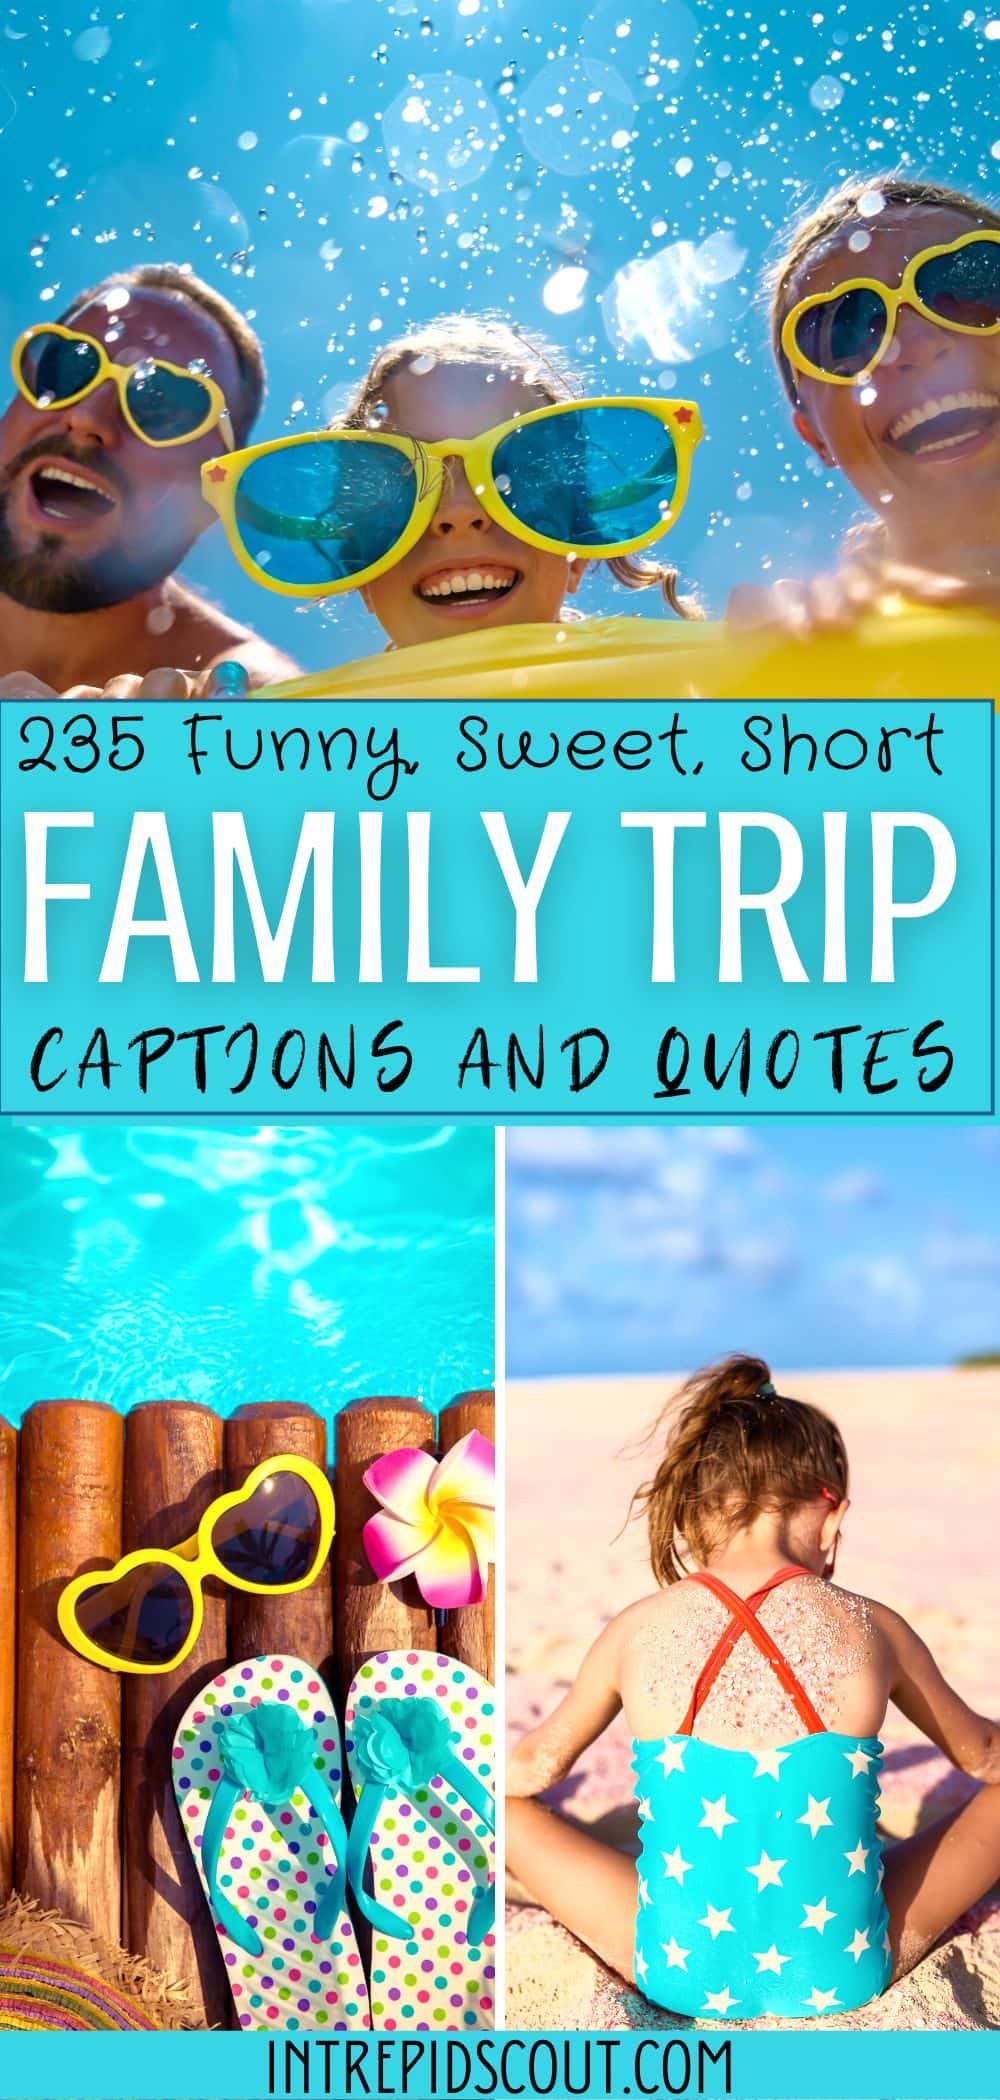 Family Trip Captions and Quotes